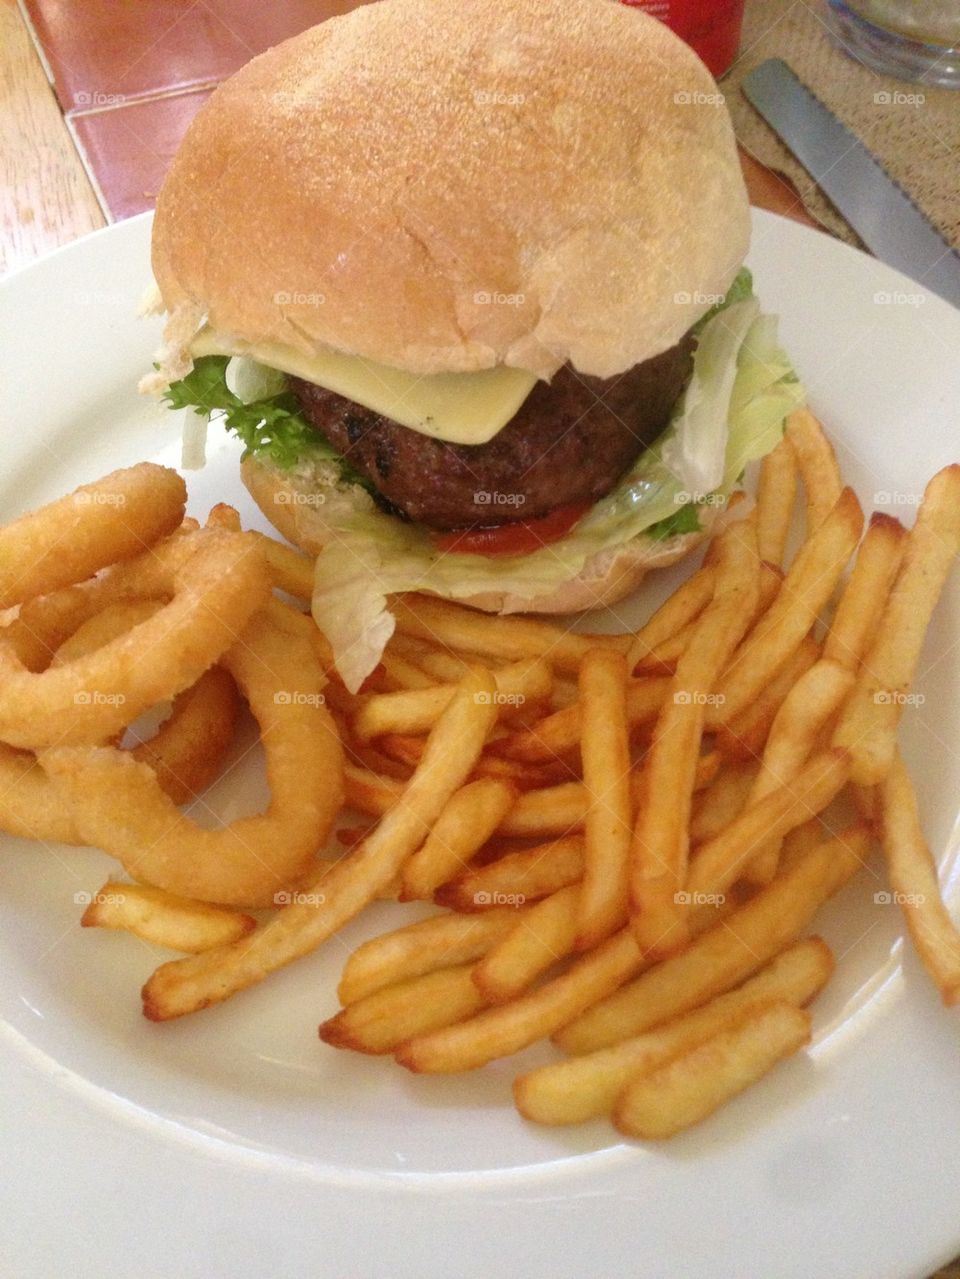 Burger and chips